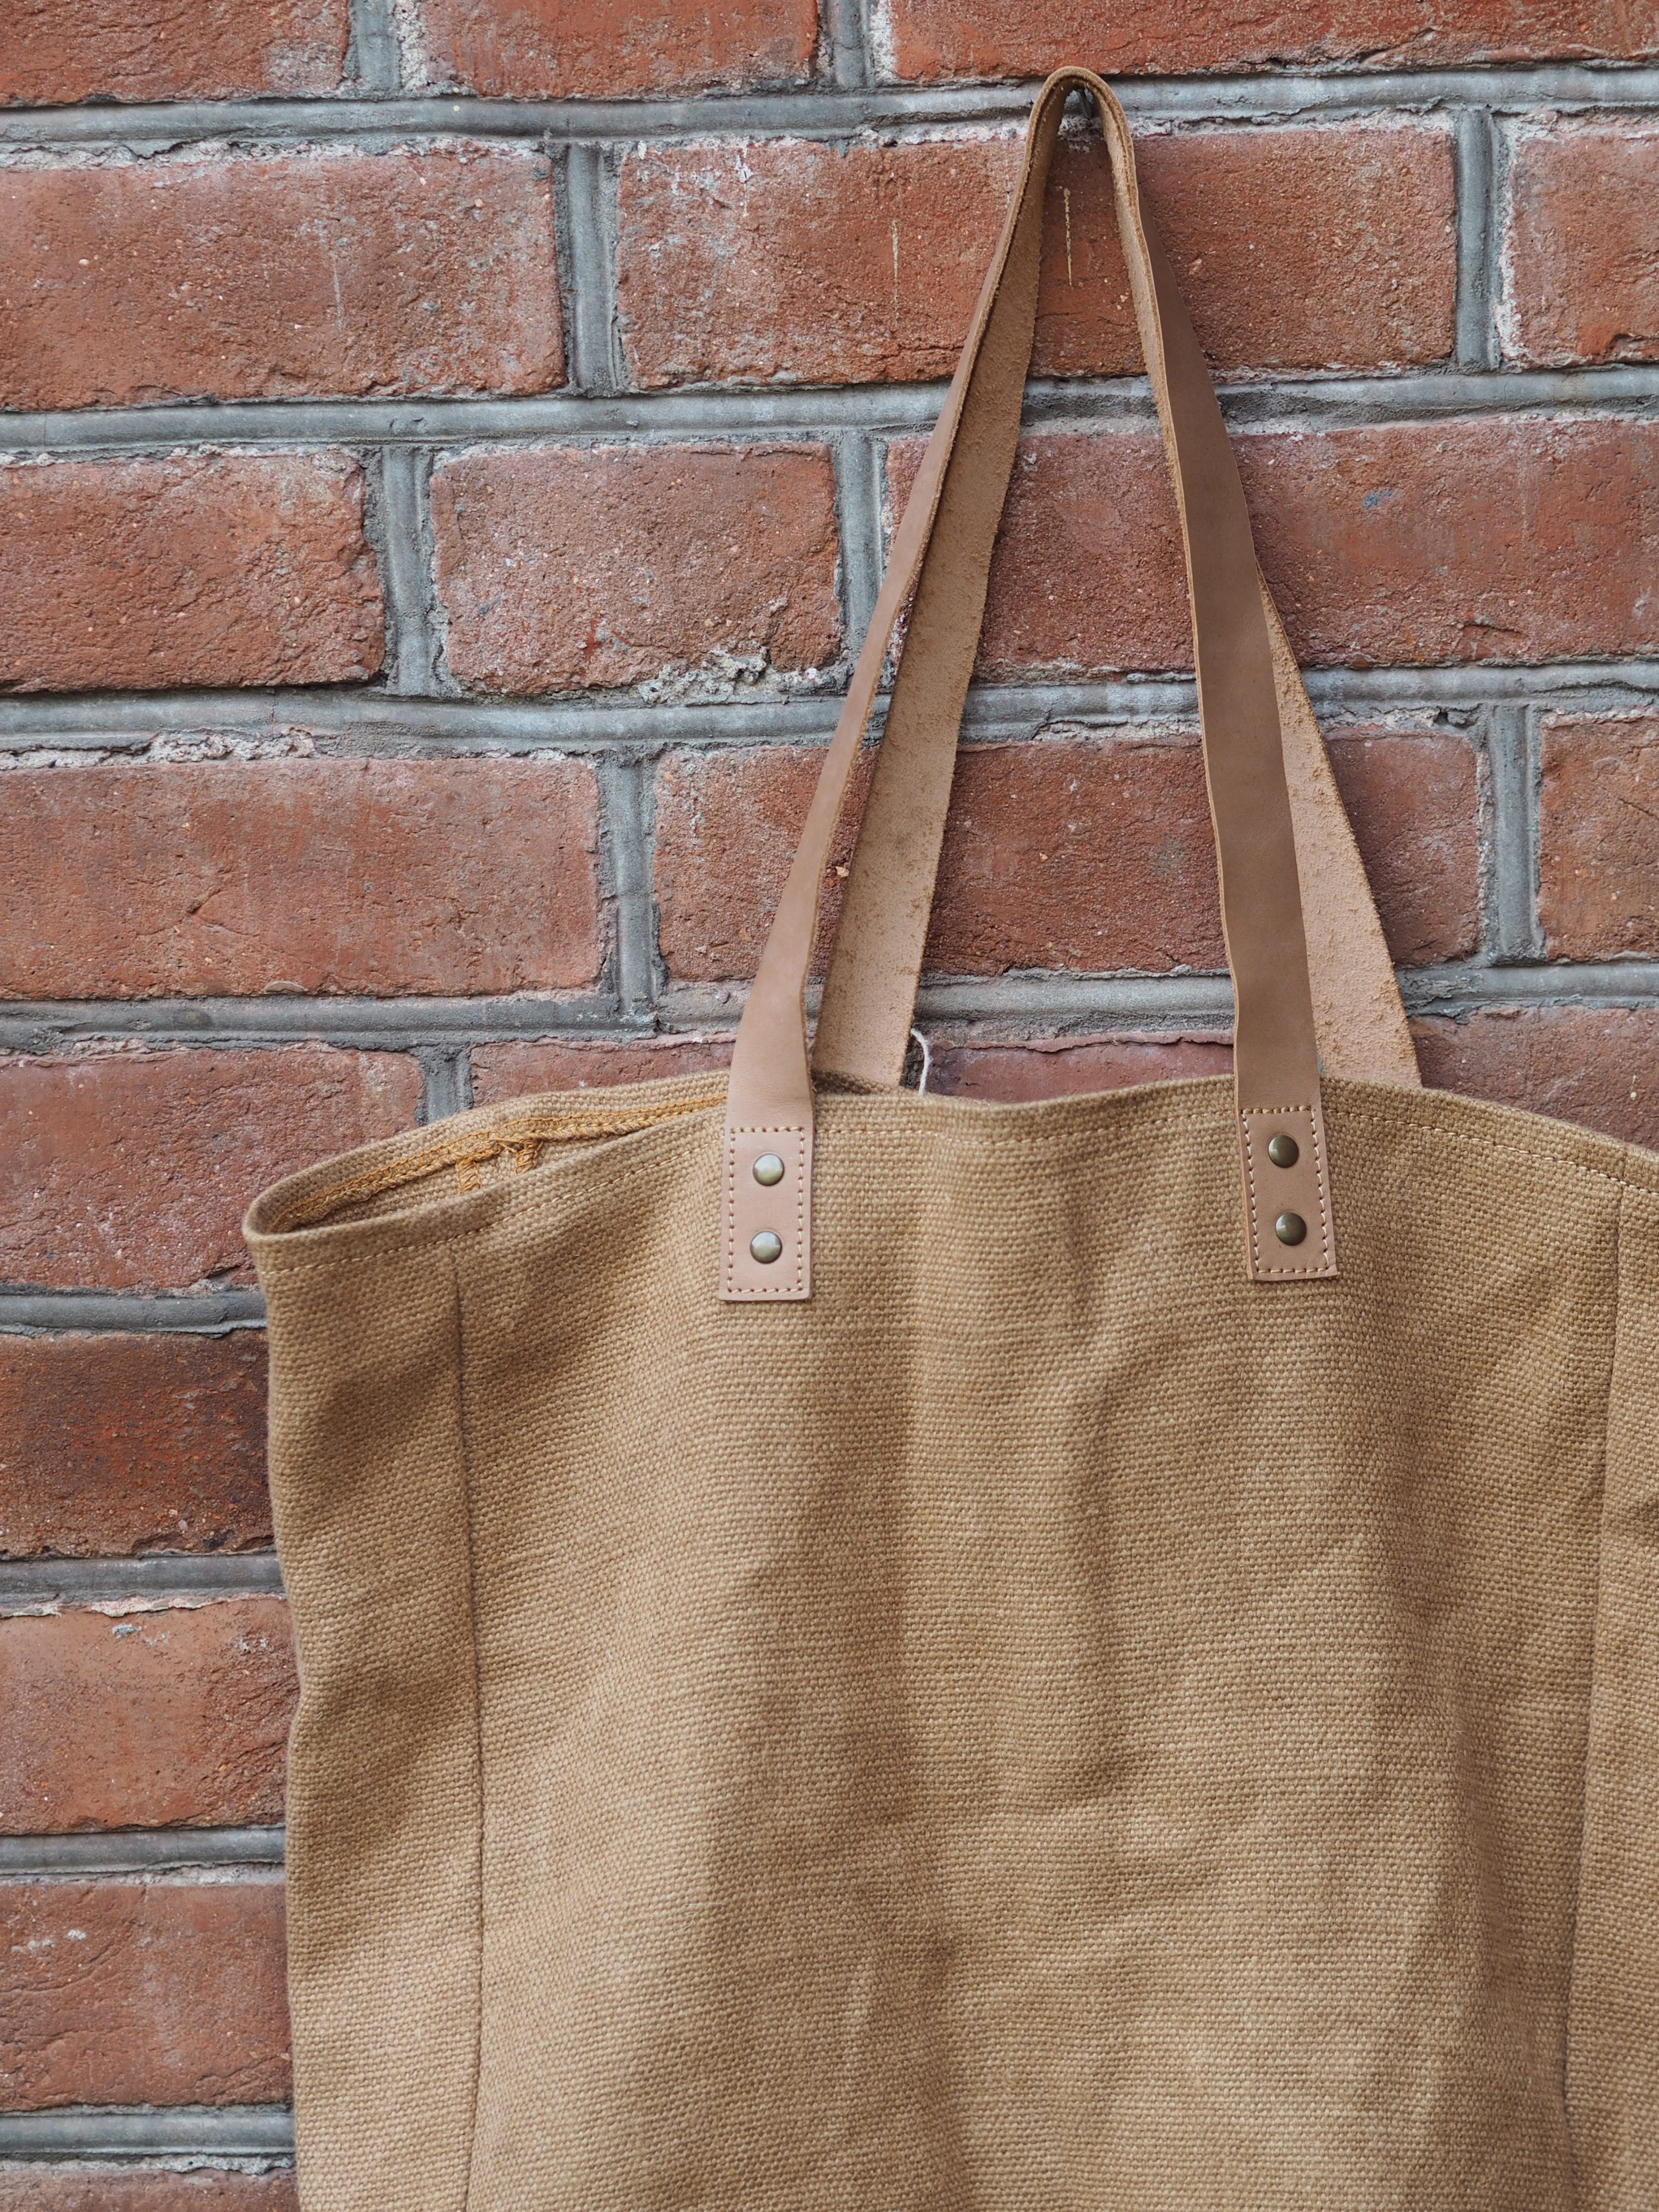 Tote W/Leather Handles - Camel, The Dharma Door